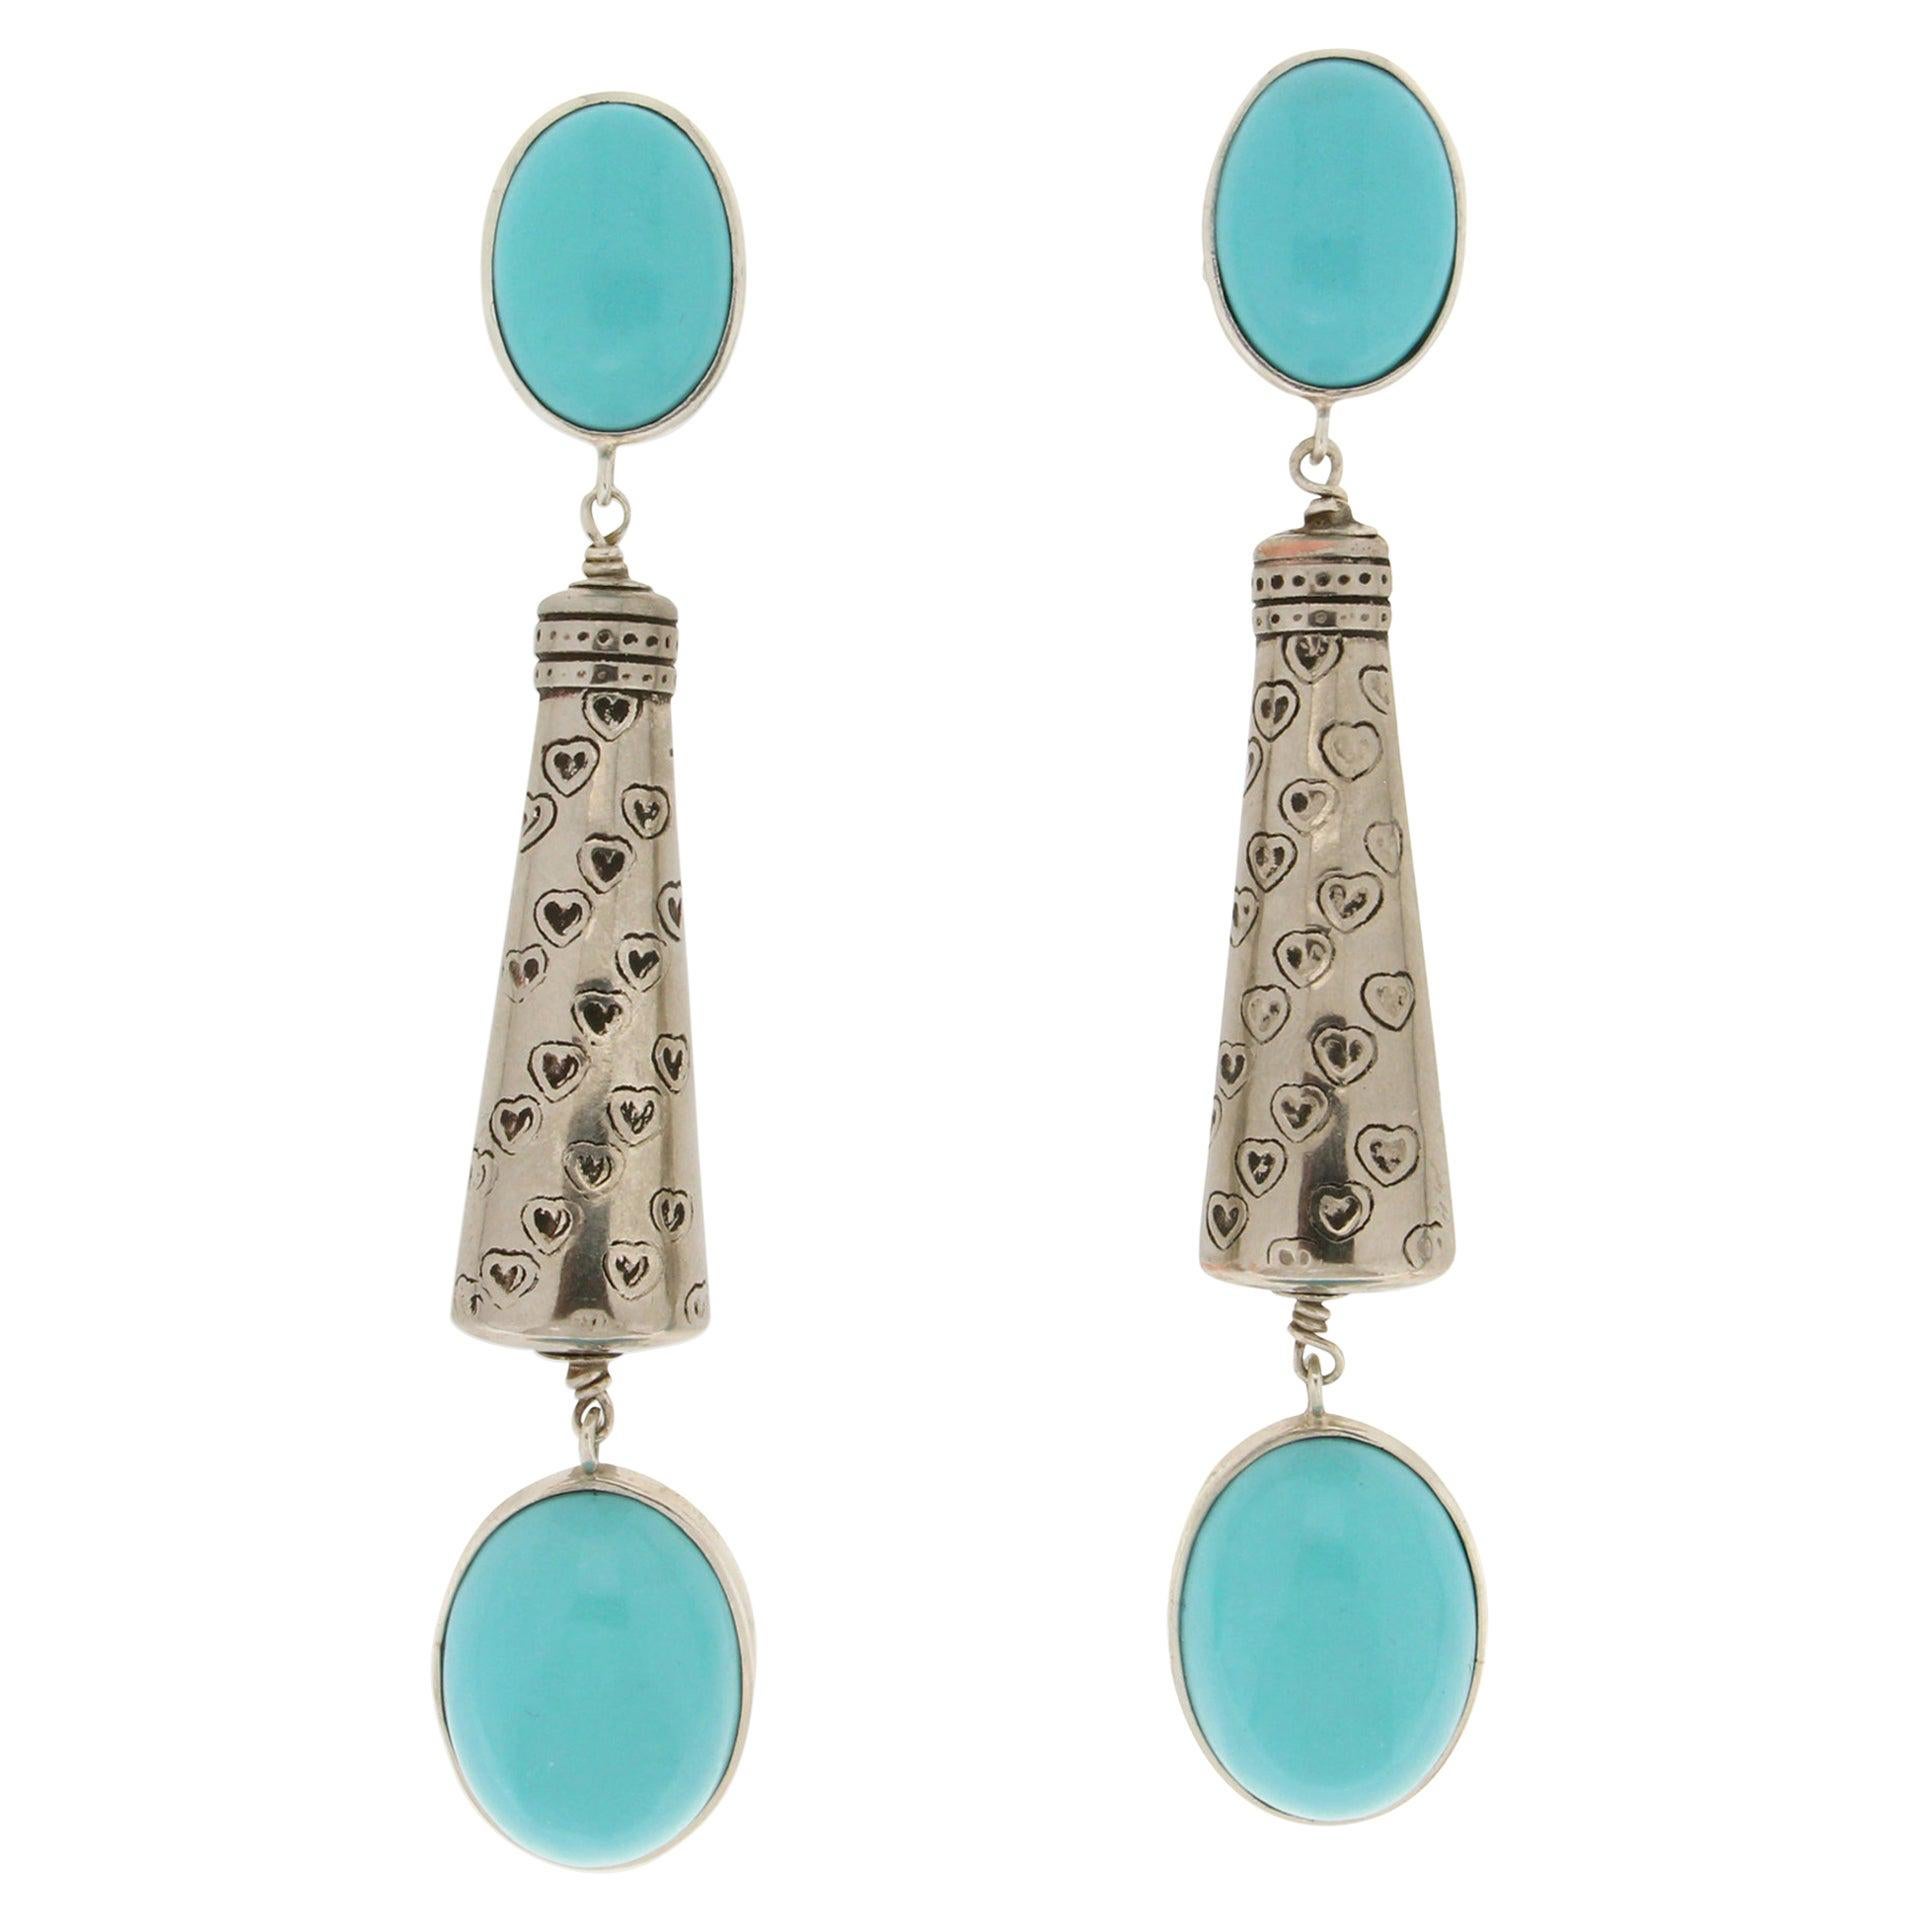 Handcraft Turquoise Paste 800 Thousandths Silver Drop Earrings For Sale